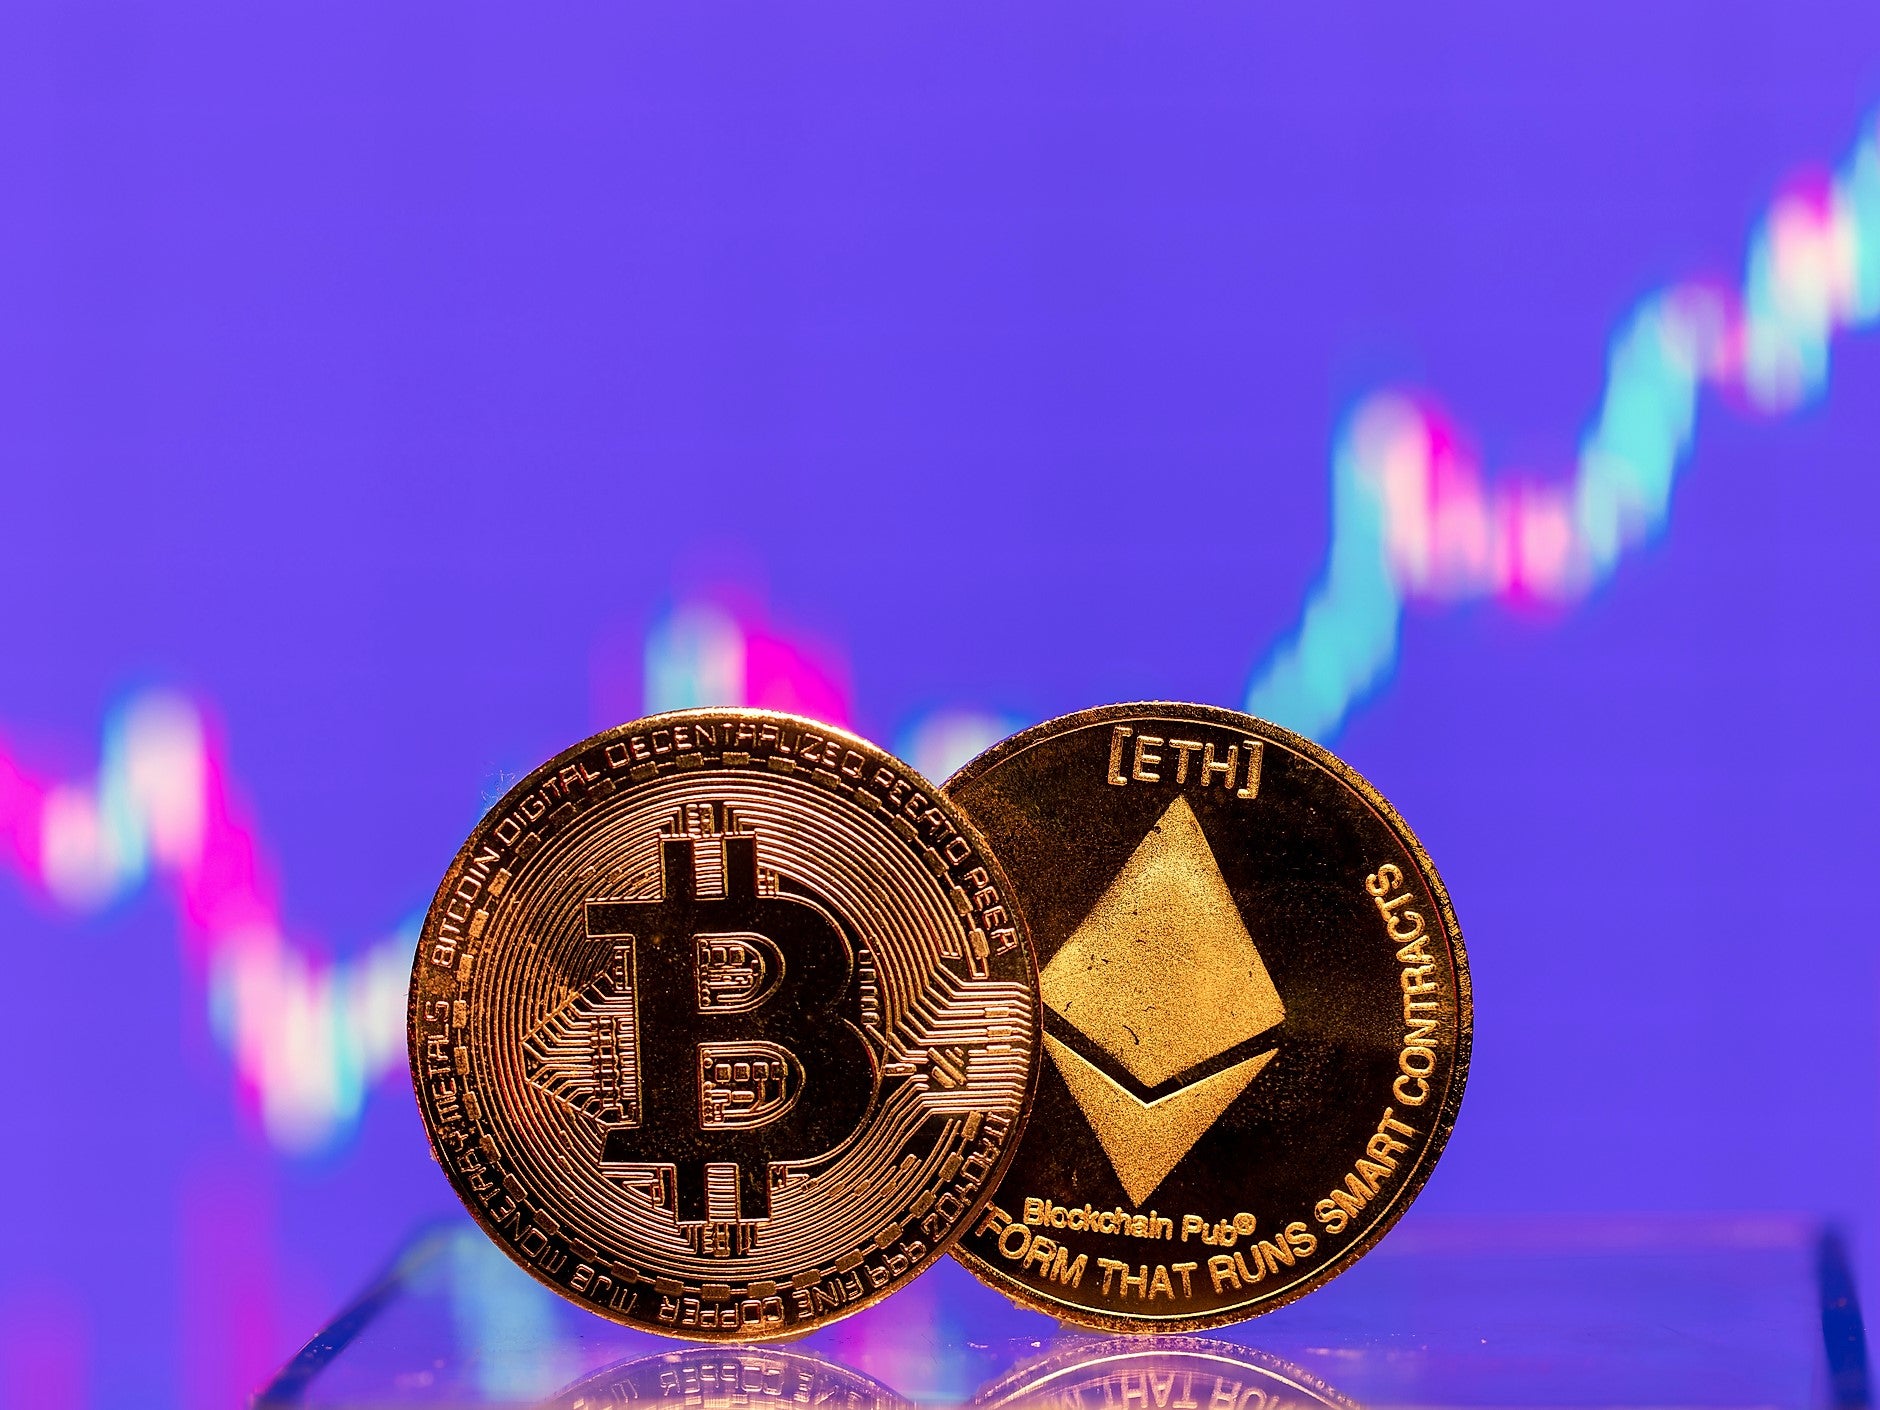 Ethereum (ether) hit a record price high on 3 November, 2021, pushing the crypto market to an all-time high